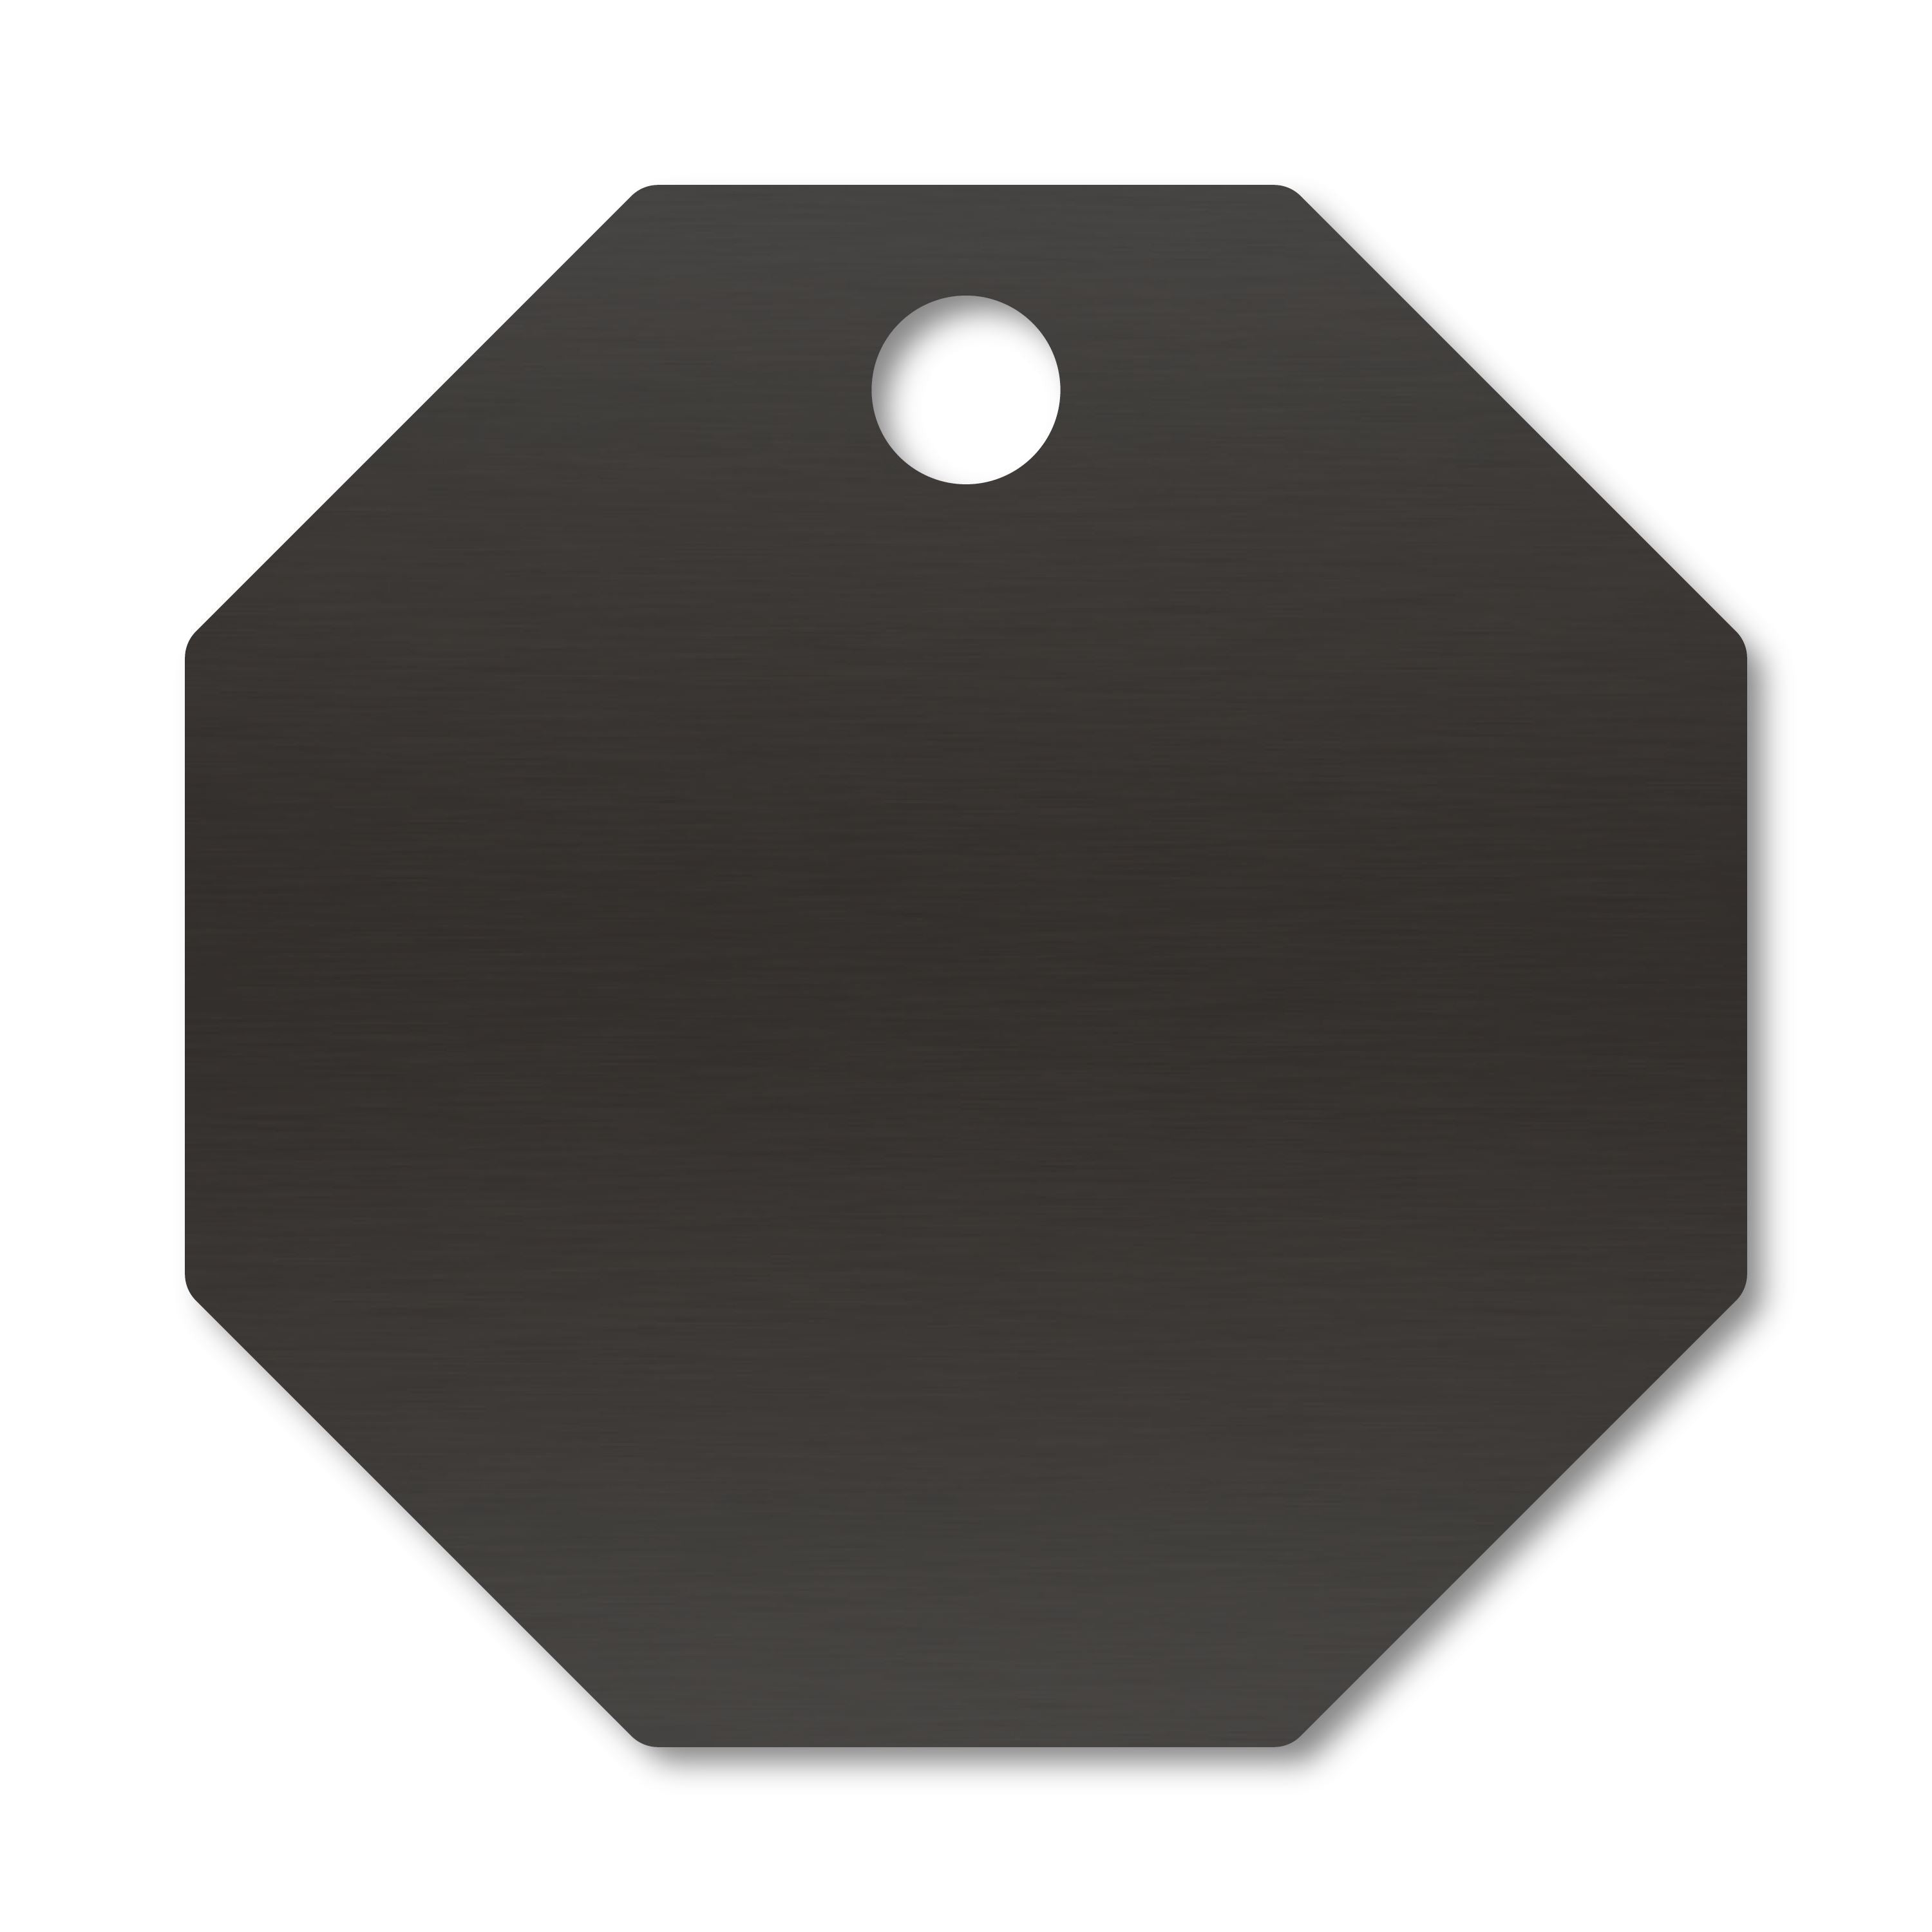 Anodized Aluminum Octagon Tags, 1" with 3/32" Hole, Laser Engraved Metal Tags Craftworks NW Black 